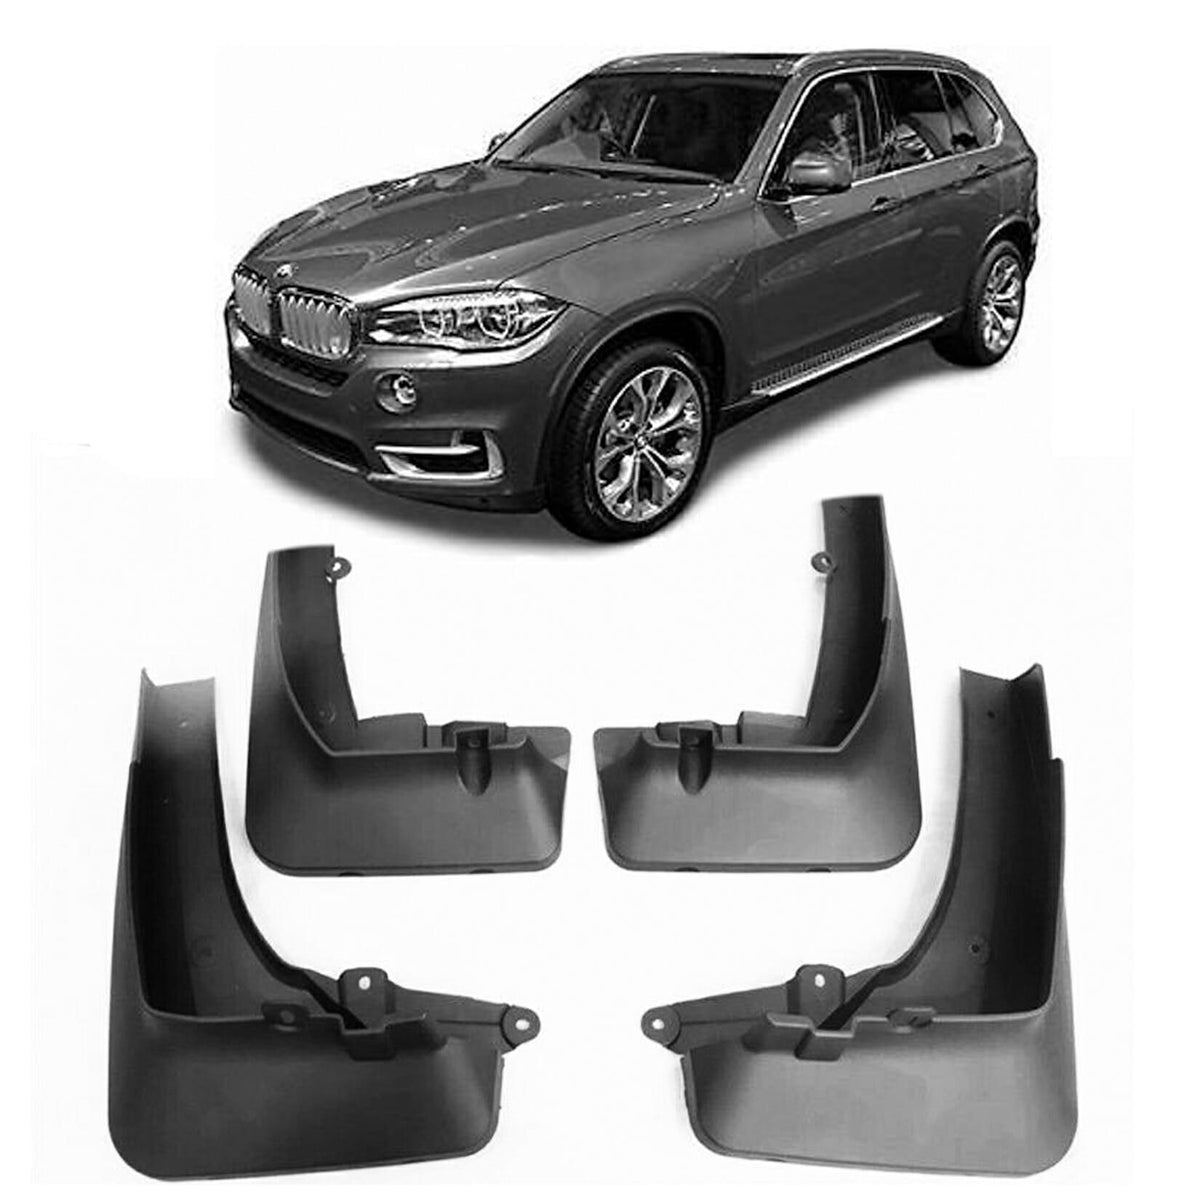 BMW X5 F15 2014-2018 OE STYLE MUD FLAP SET - FOR MODELS WITH SIDE STEPS - Storm Xccessories2